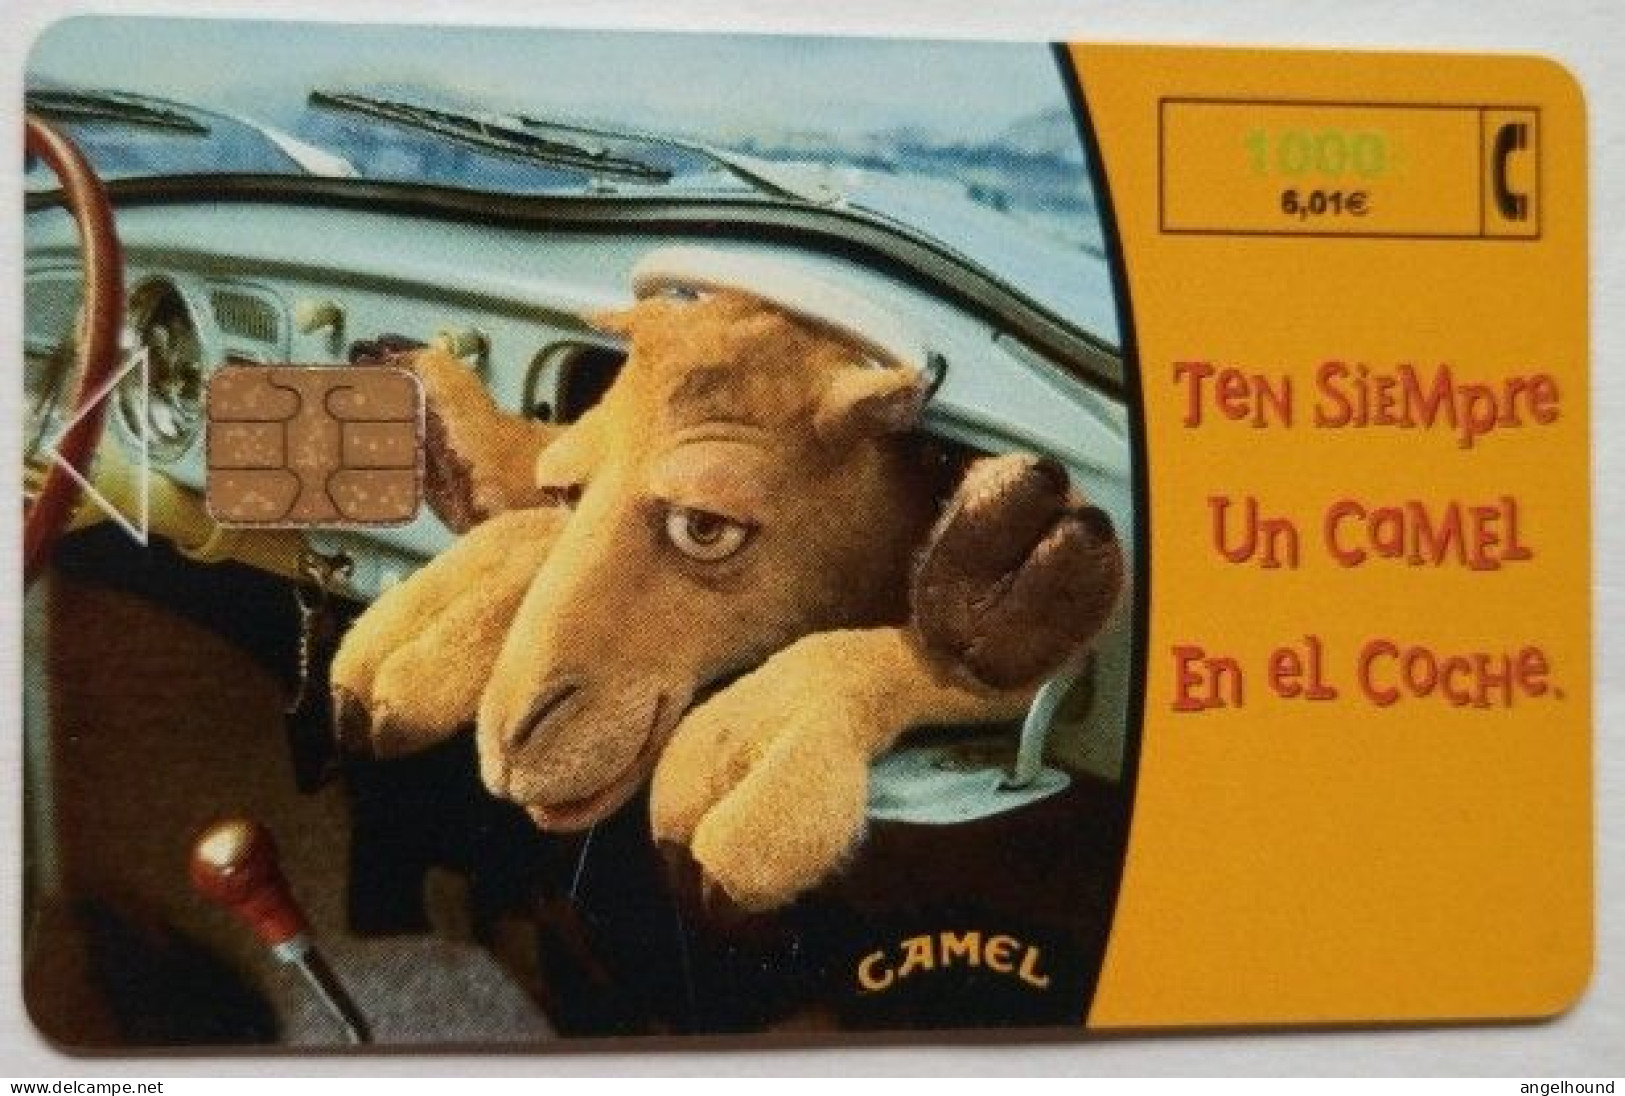 Spain 1000 Pta. Chip Card -  Camel ( Tobaco ) - Basic Issues